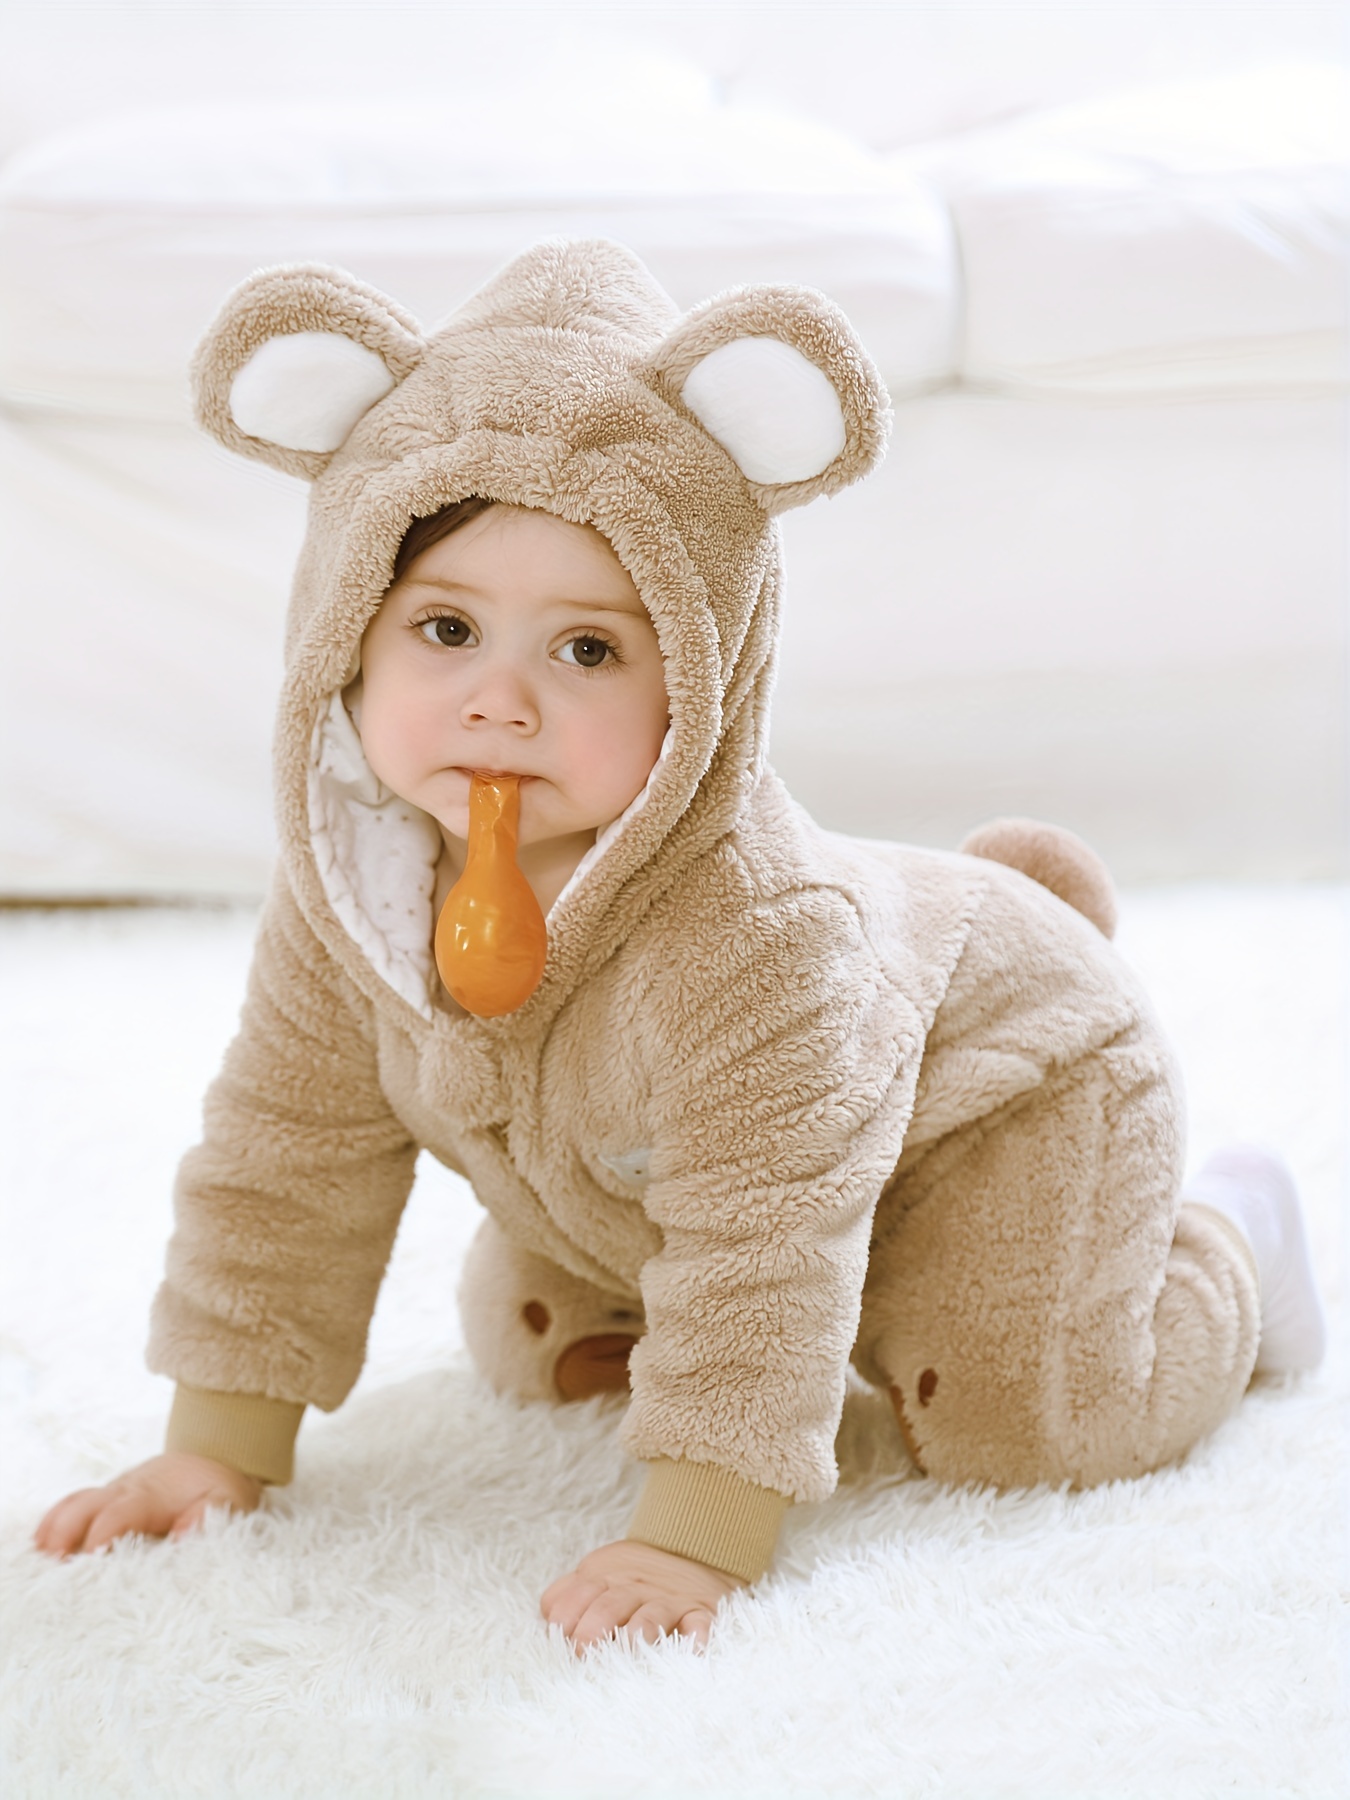 Baby Cute Bear Shapewear Jumpsuit, Plush Warm Hooded Zip Up Footed Onesie,  Adorable For Daily Outdoor Photo Gathering Party Winter!